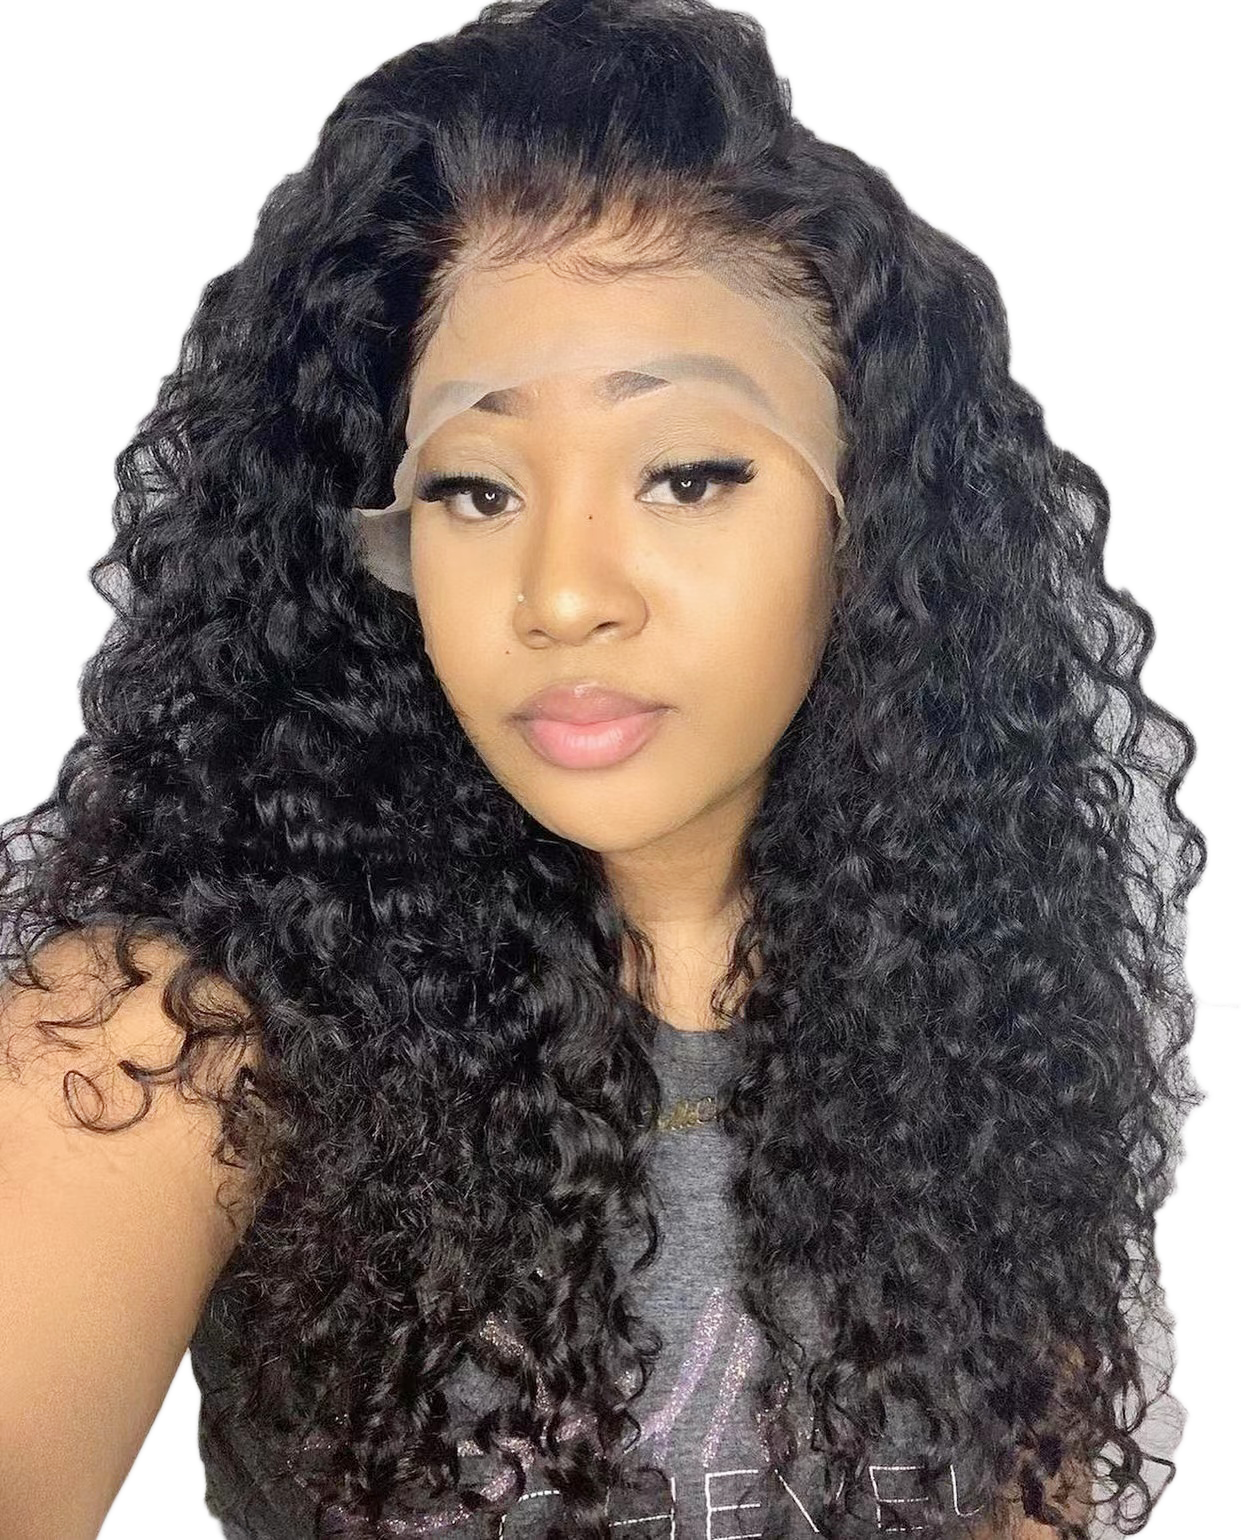 How to choose the best lace front wigs?